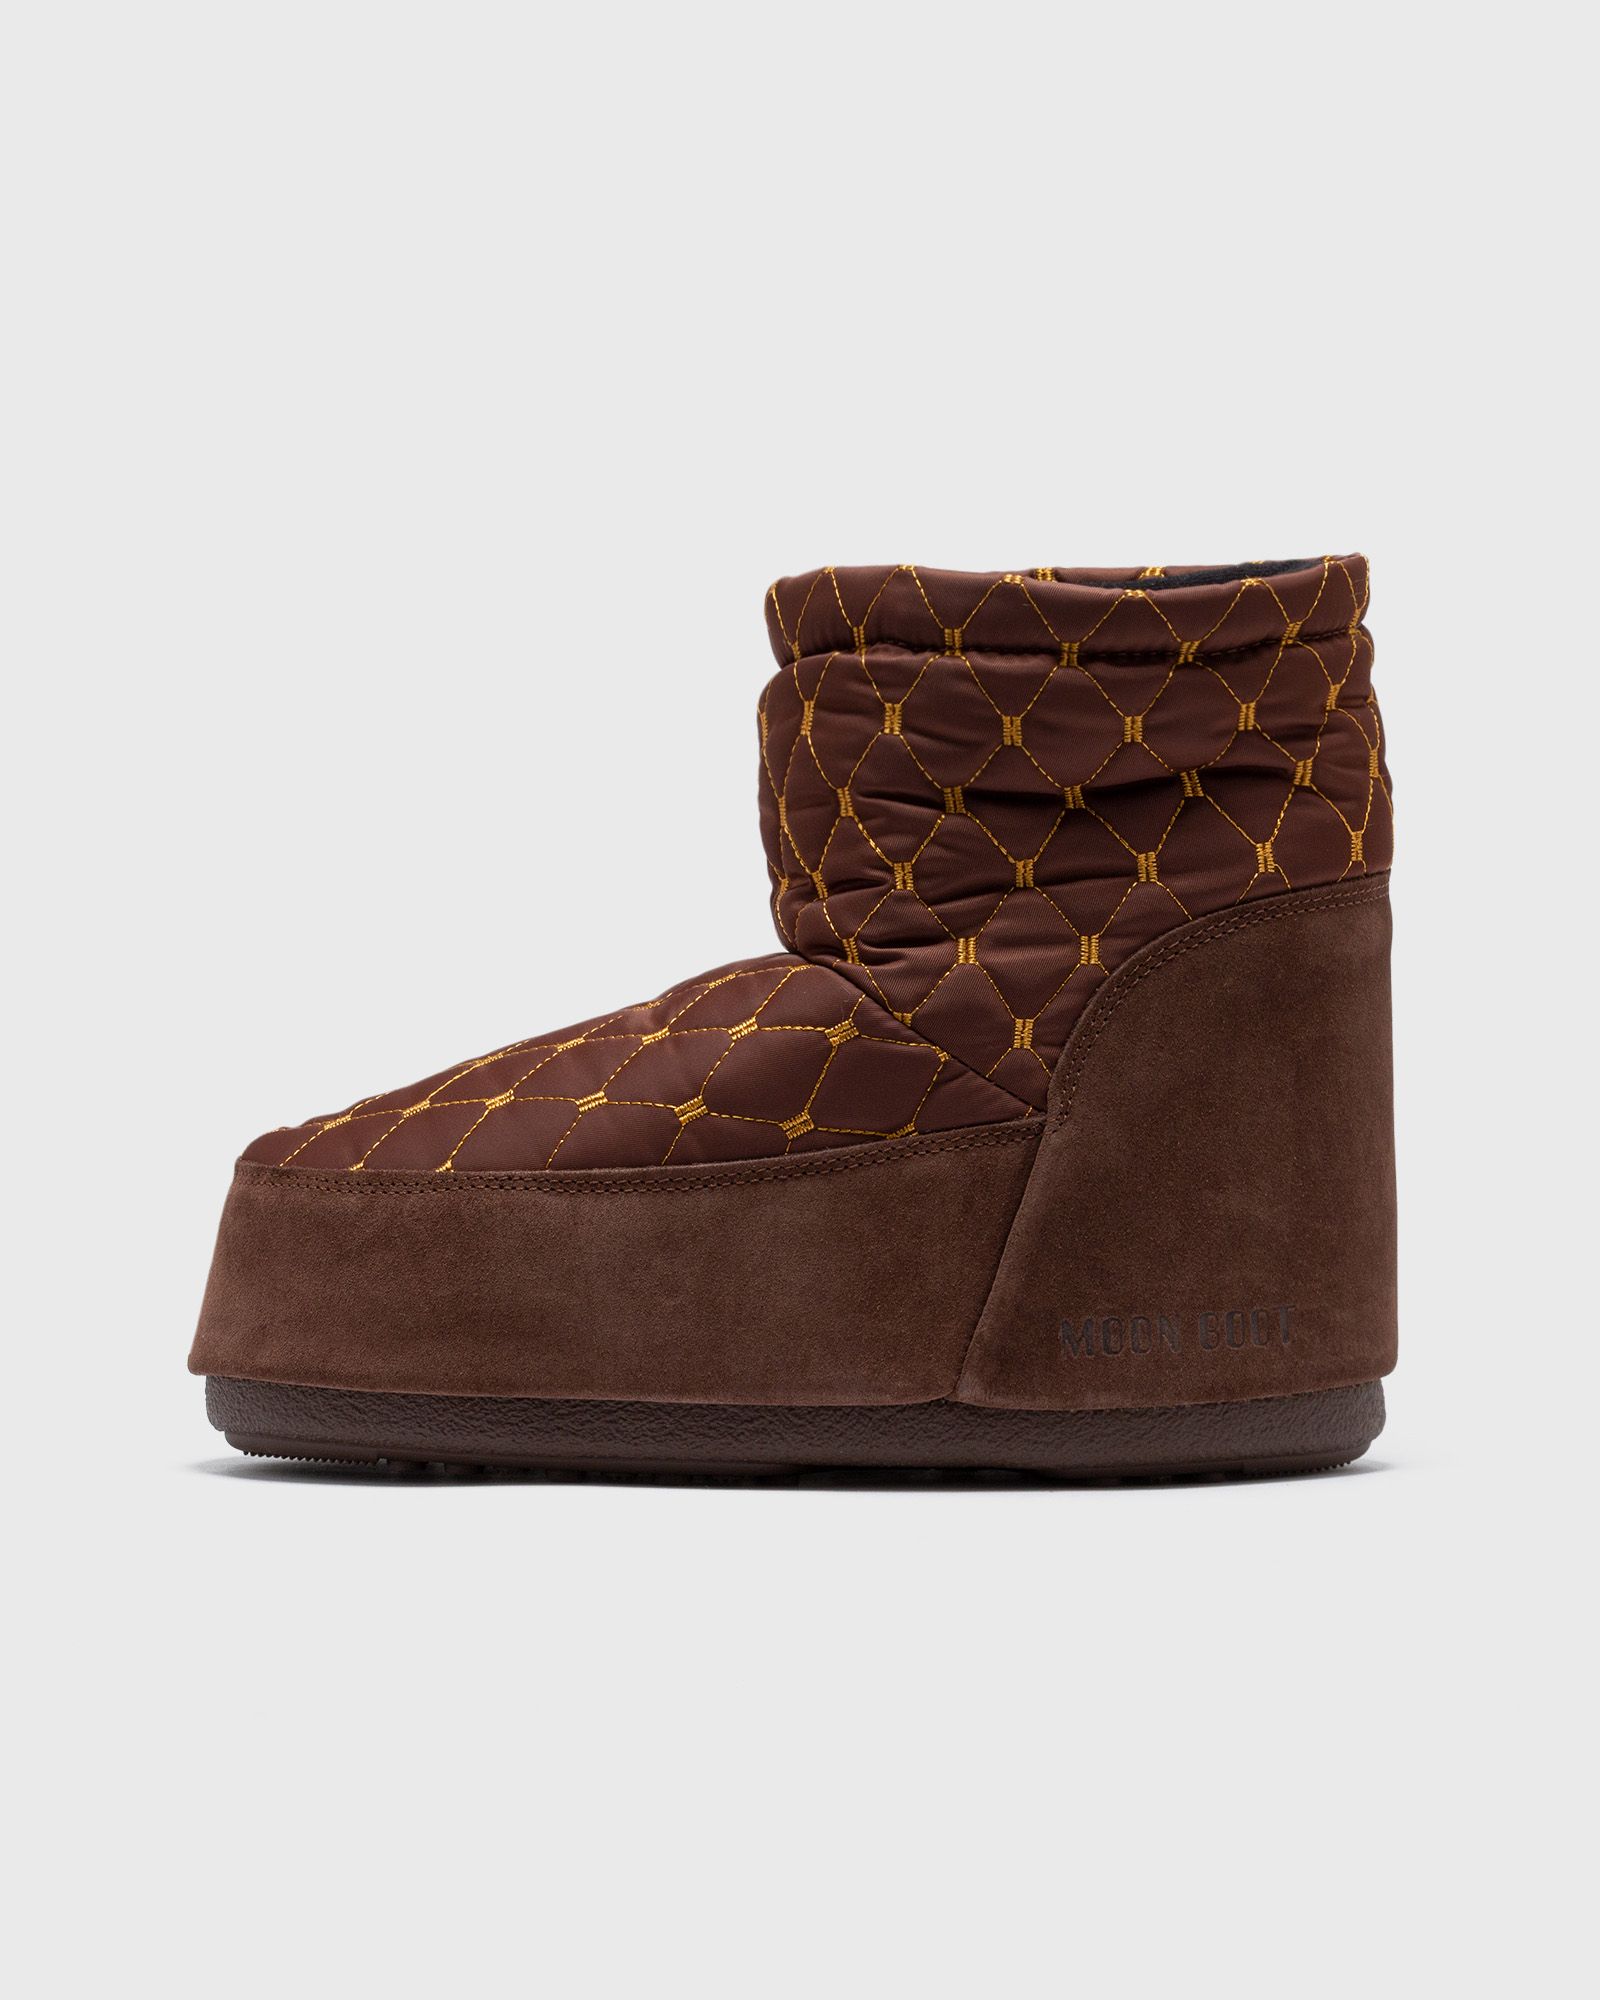 Moon Boot - icon low nolace quilted men boots brown in größe:42-44